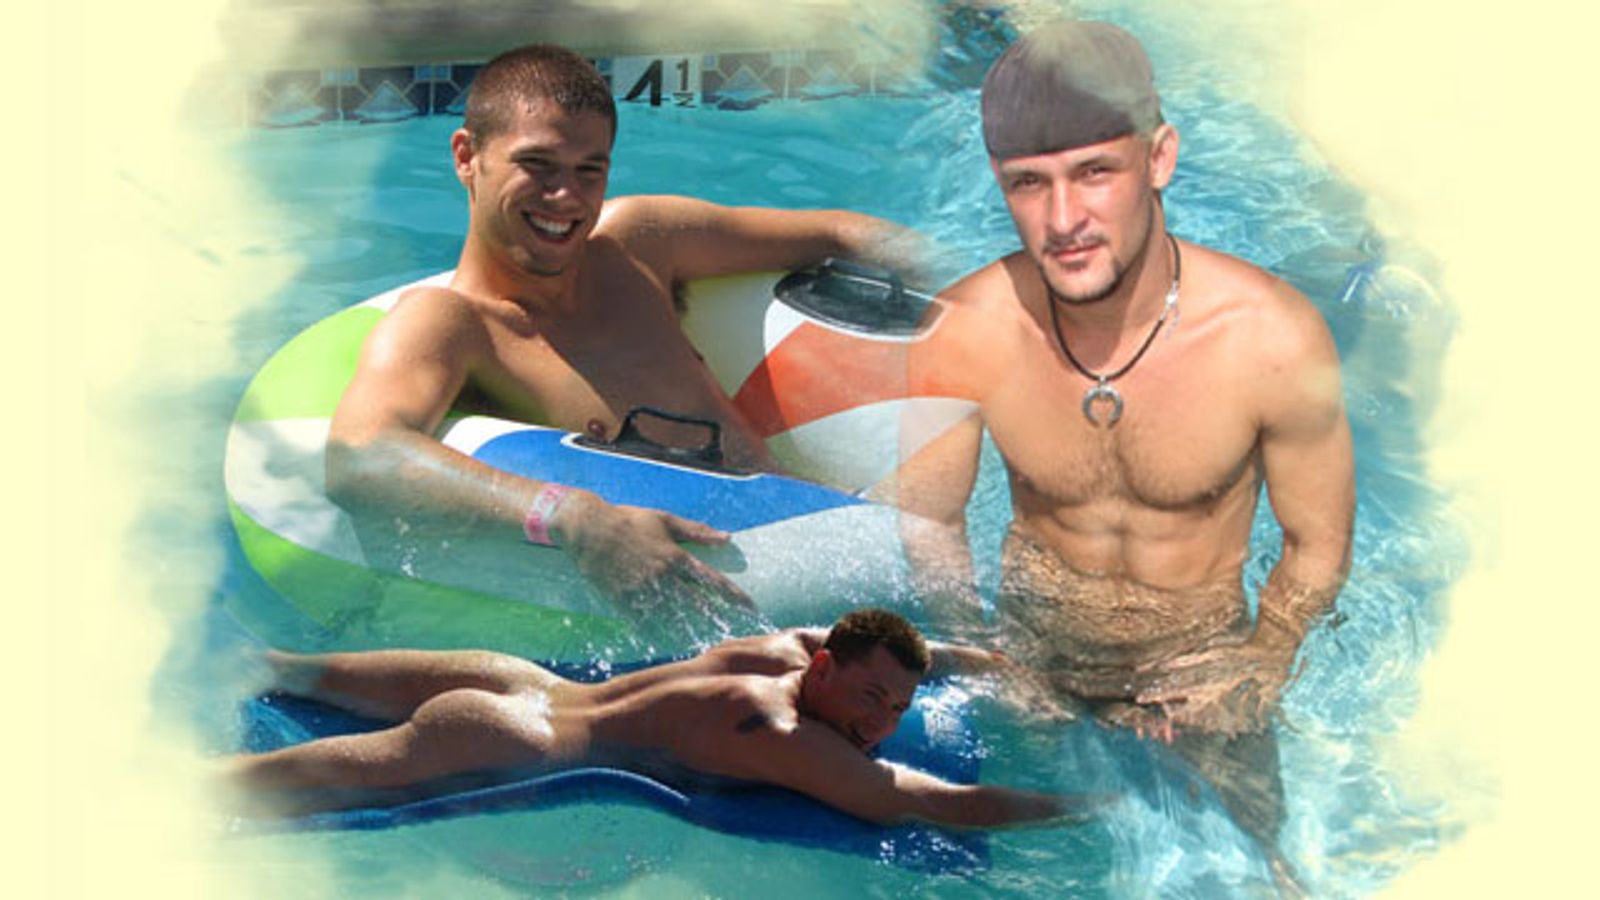 RentBoy Summer Pool Party Tour to Hit Palm Springs, New York